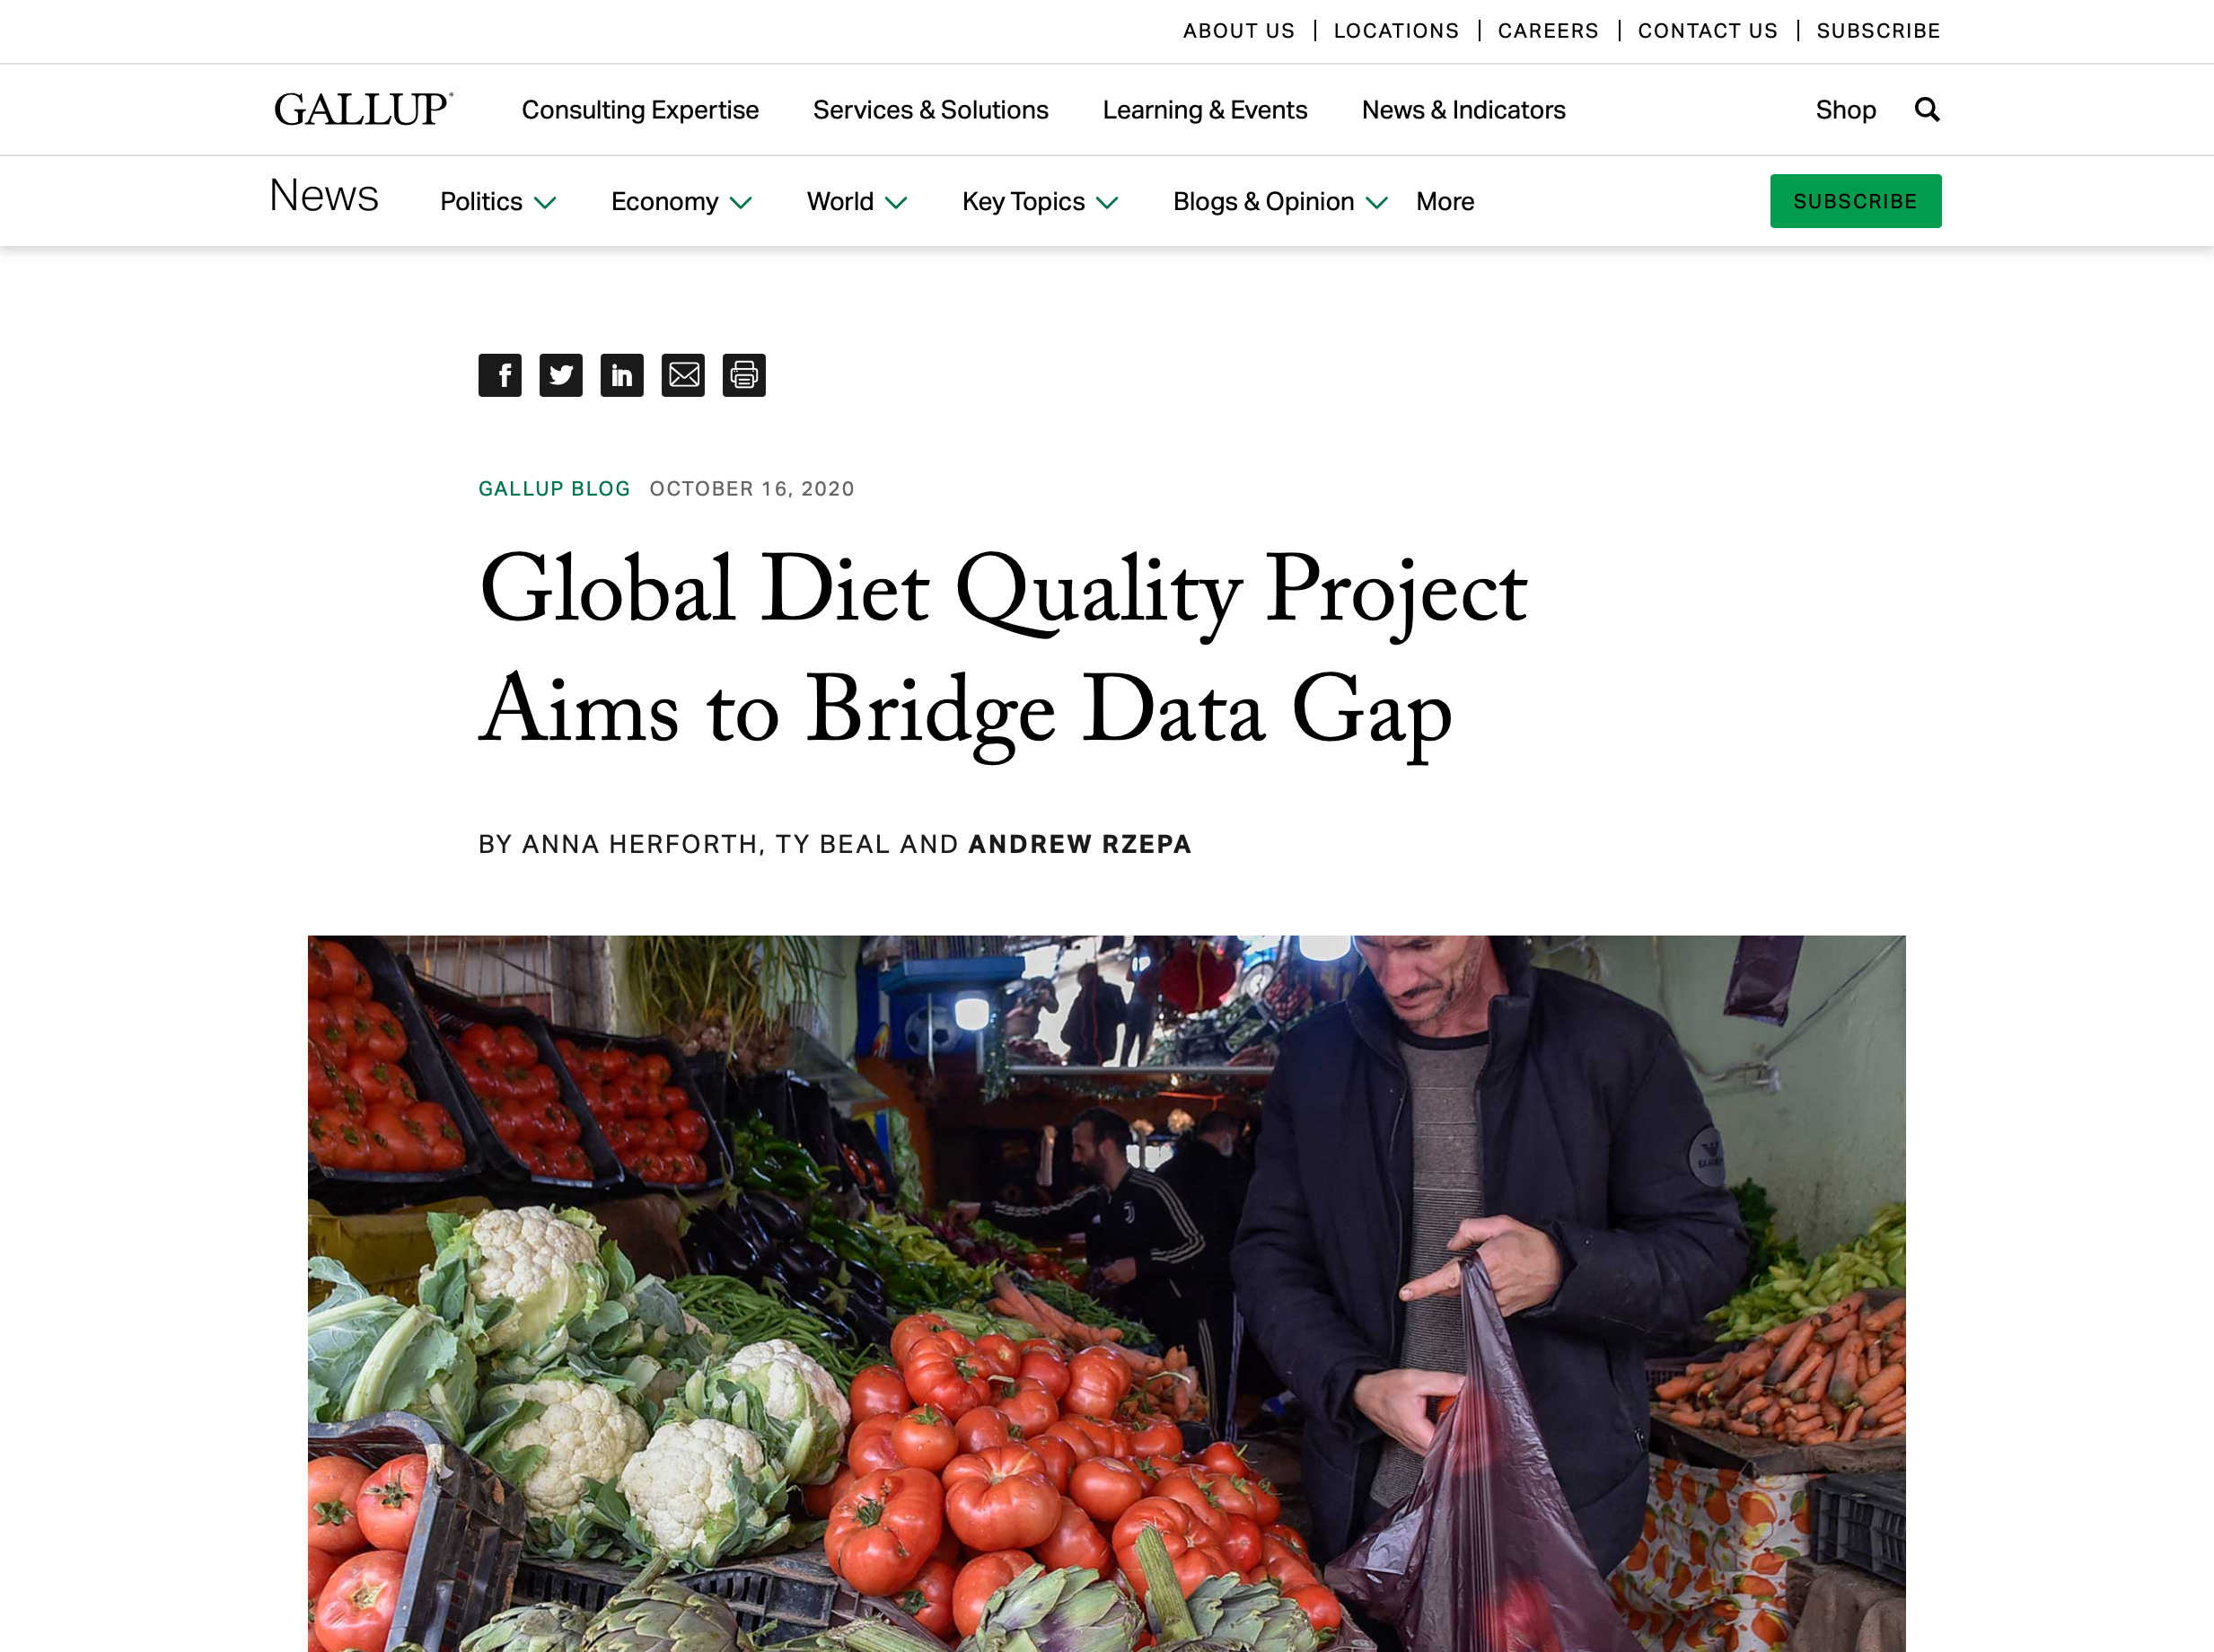 Global Diet Quality Project Aims to Bridge Data Gap